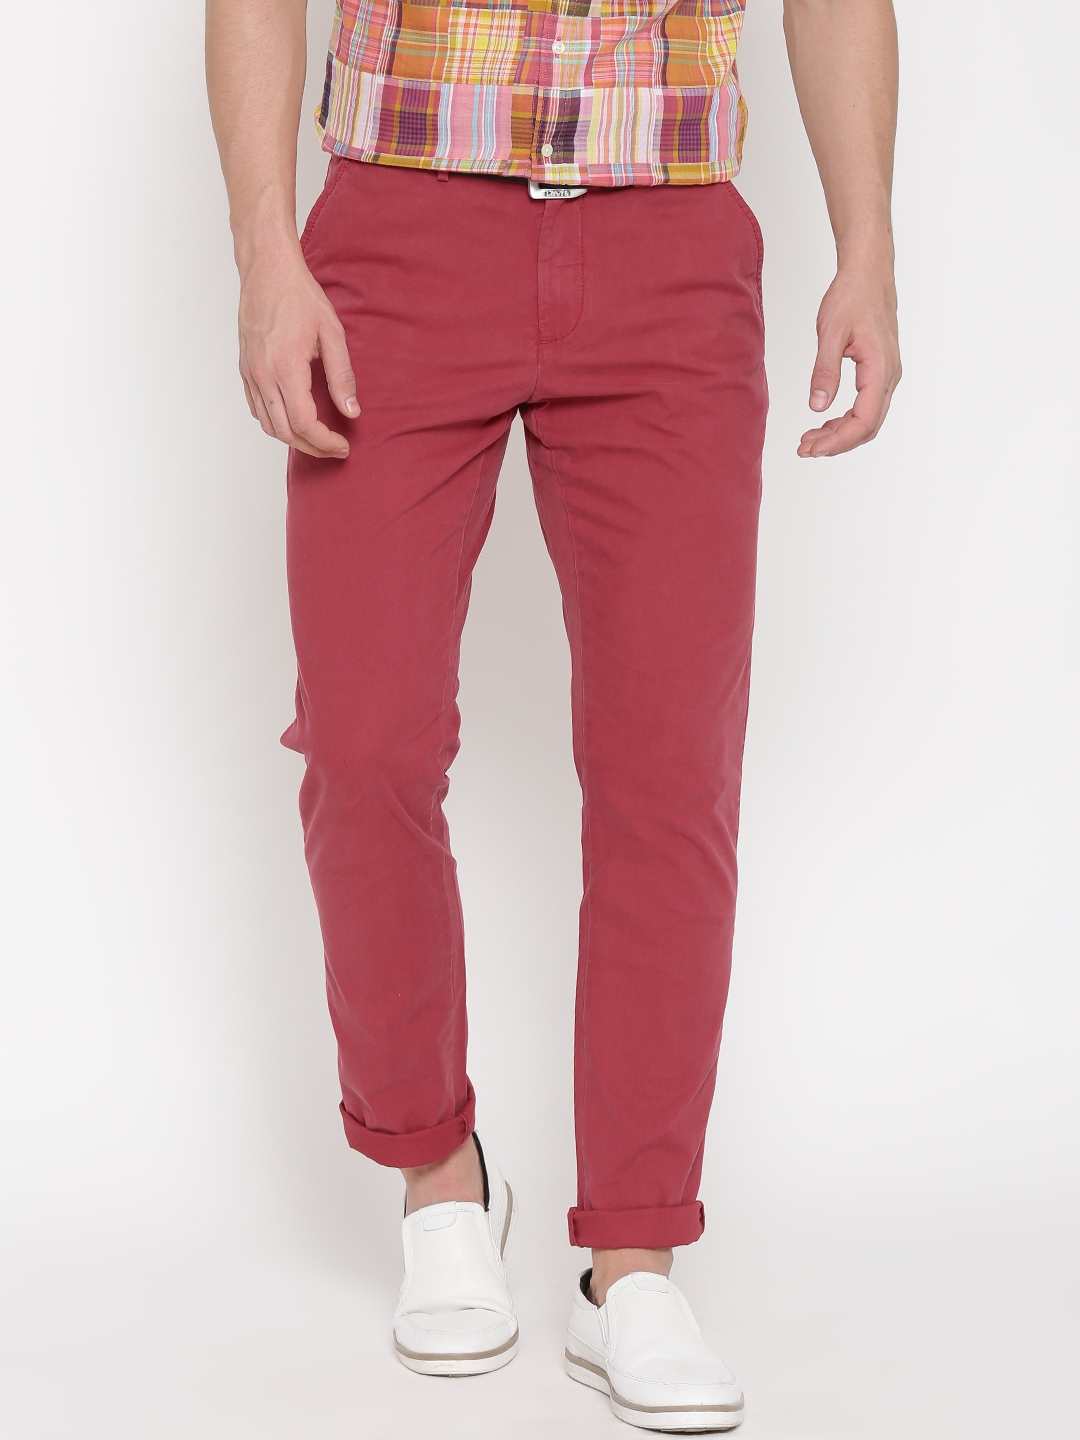 Buy Tommy Hilfiger Men Red Chinos - Trousers for Men 1550349 | Myntra